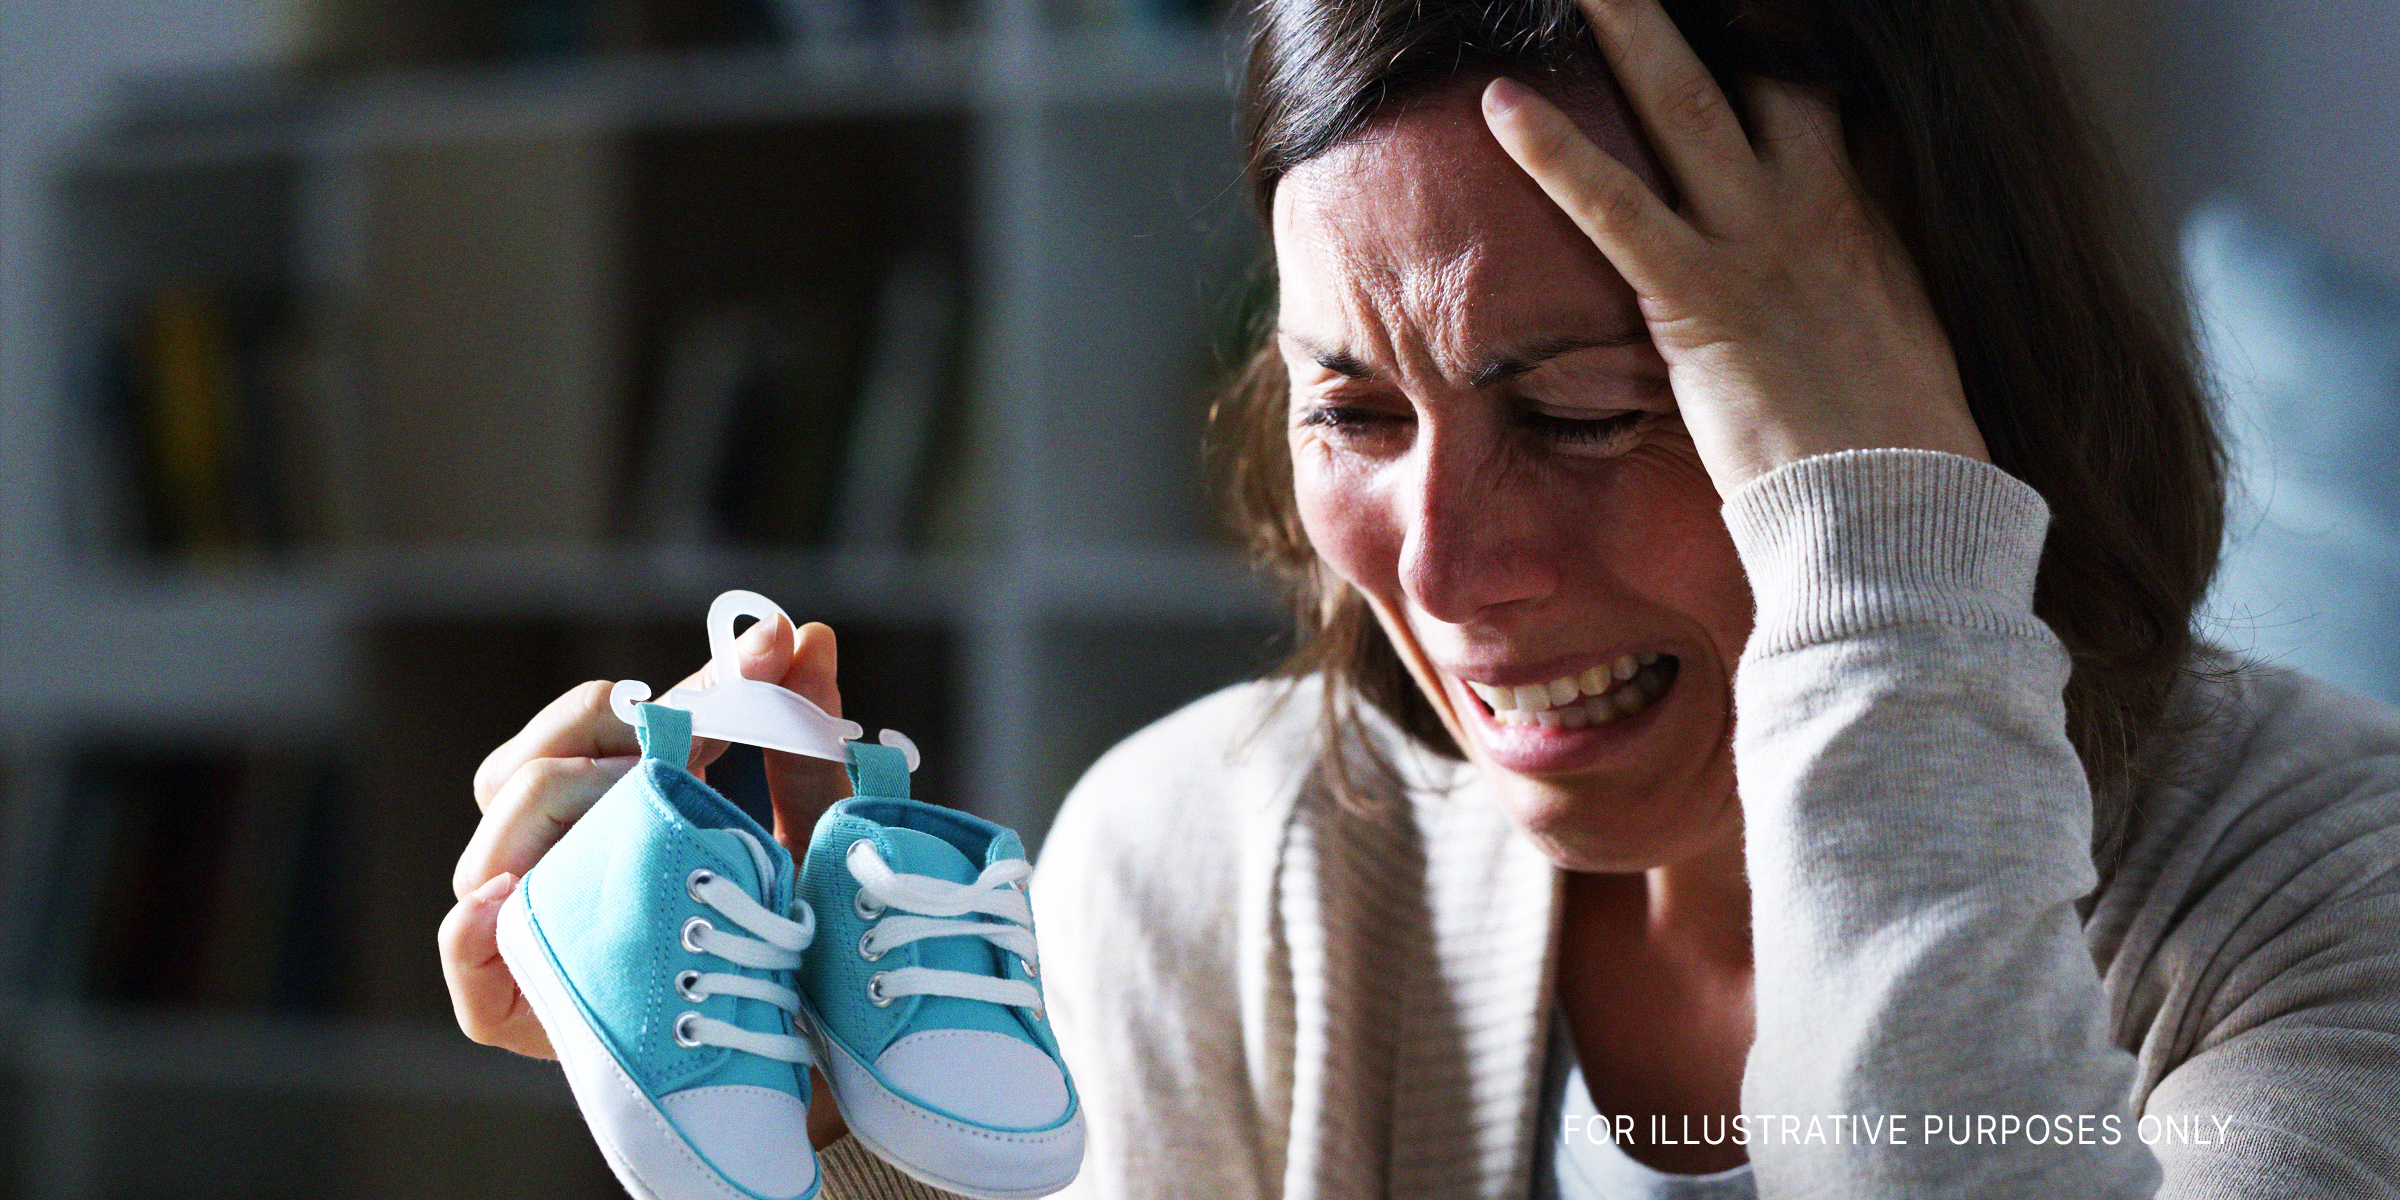 A woman crying while holding baby shoes | Source: Shutterstock